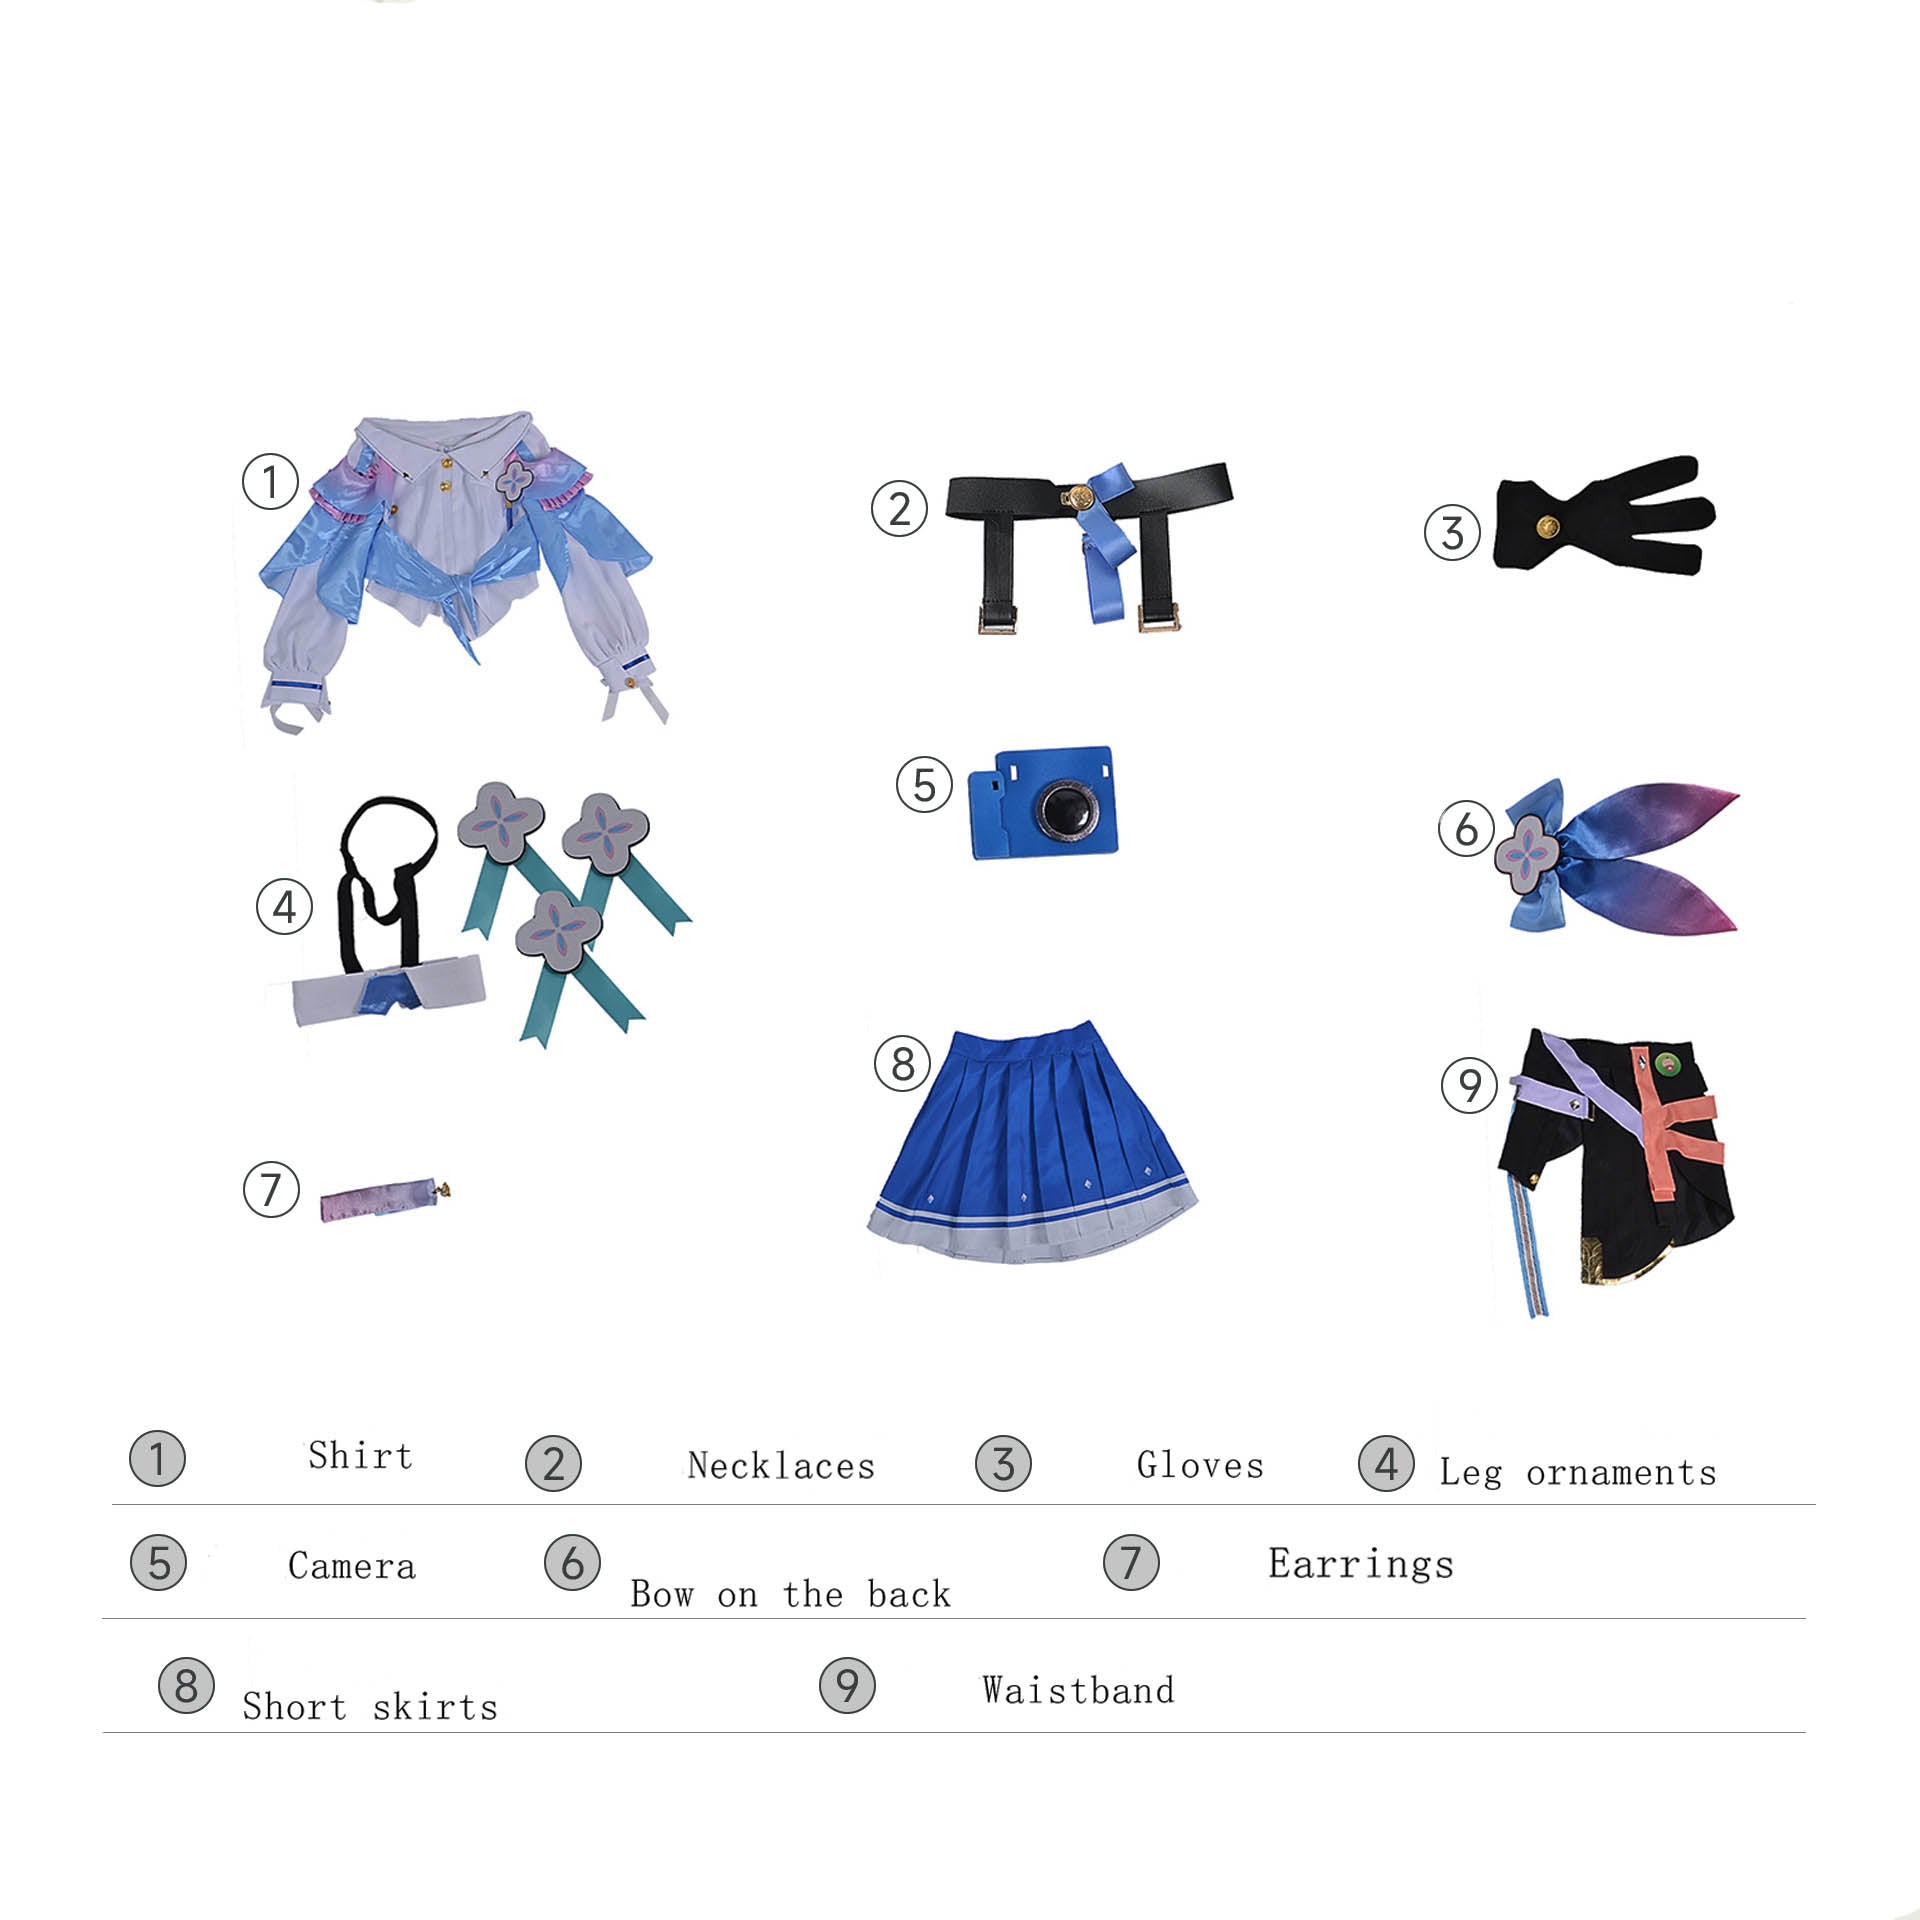 Rulercosplay Honkai Star Rail March 7th Uniform Suit Cosplay Costume With Accessories For Halloween Party